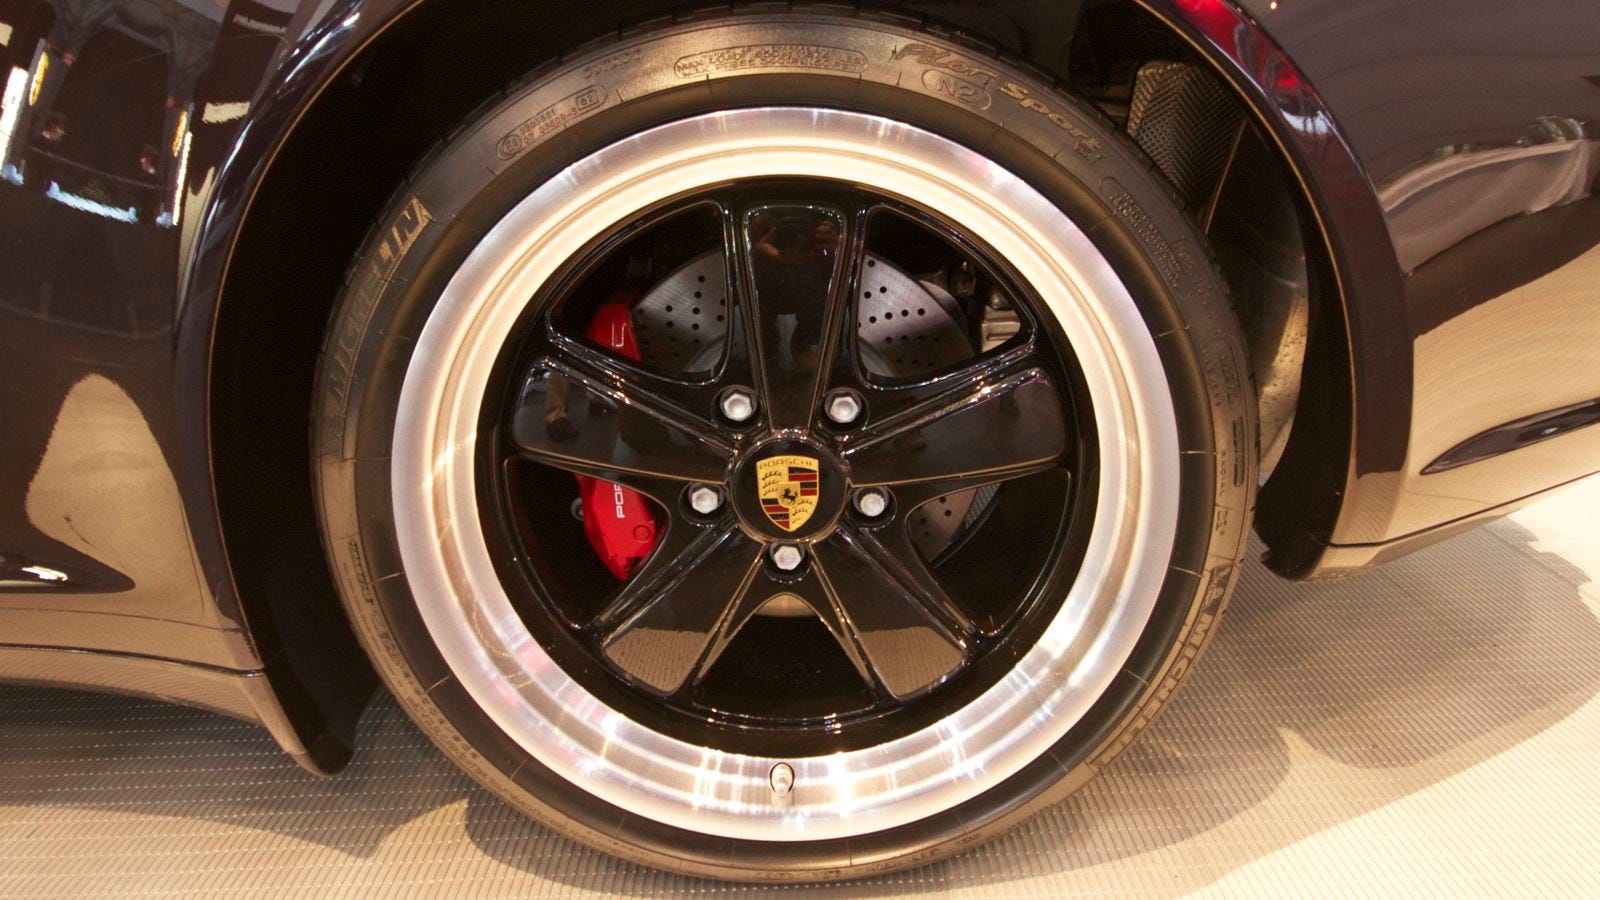 Awesome Fuchs-style Porsche wheels cost $6,000